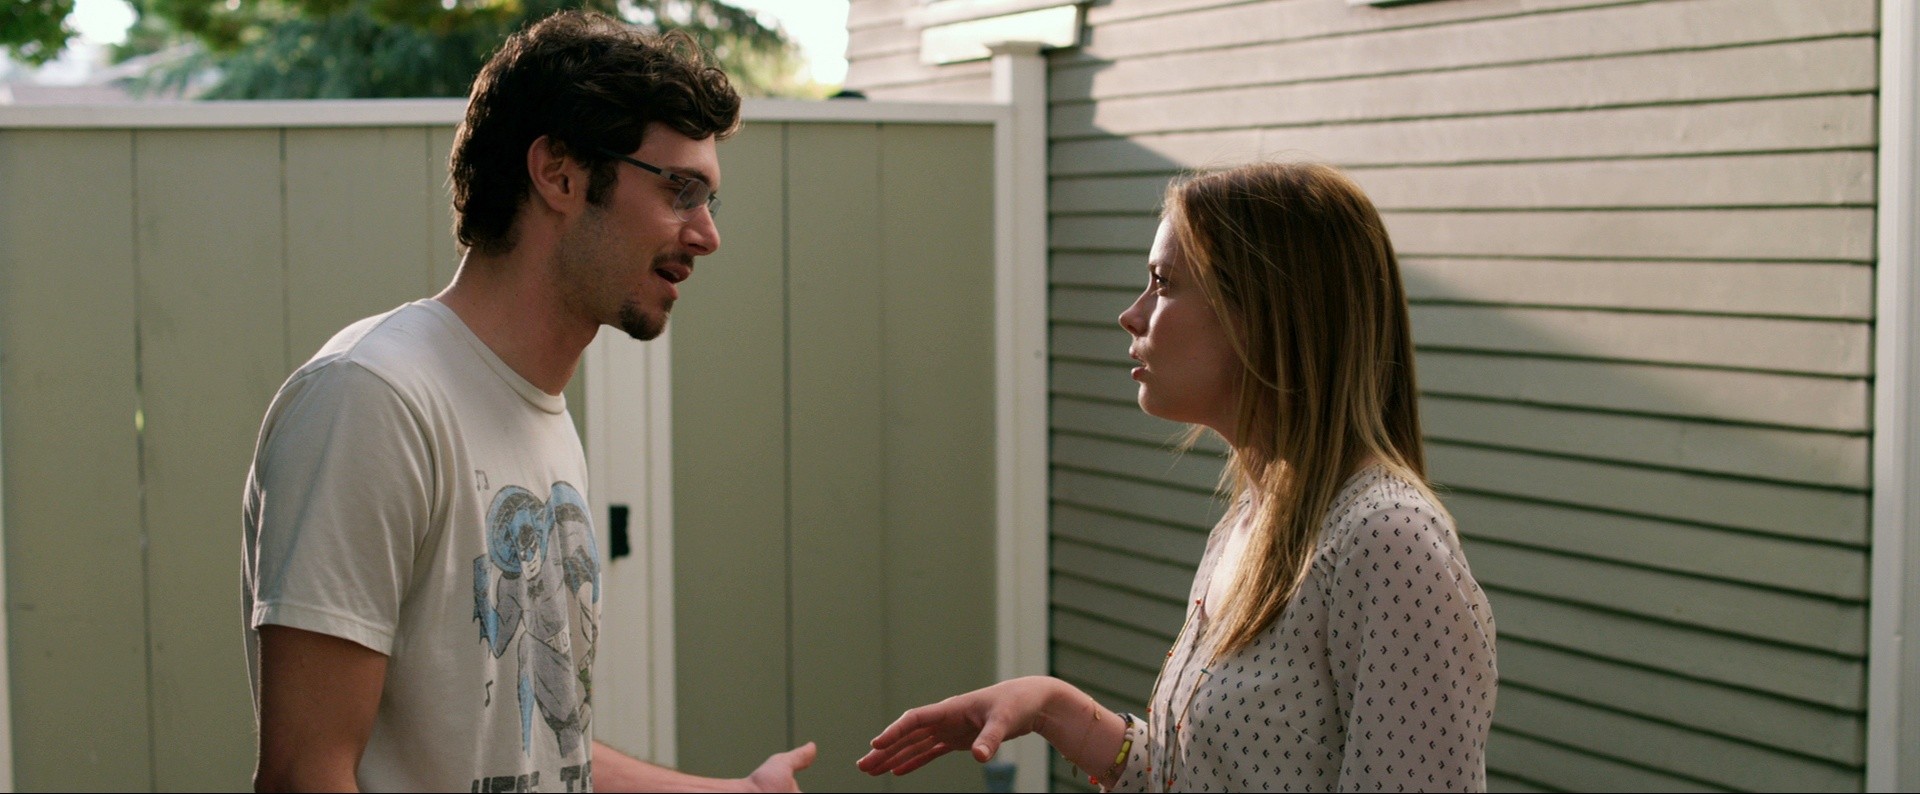 Adam Brody stars as Tim and Gillian Jacobs stars as Paige in Magnolia Pictures' Life Partners (2014)